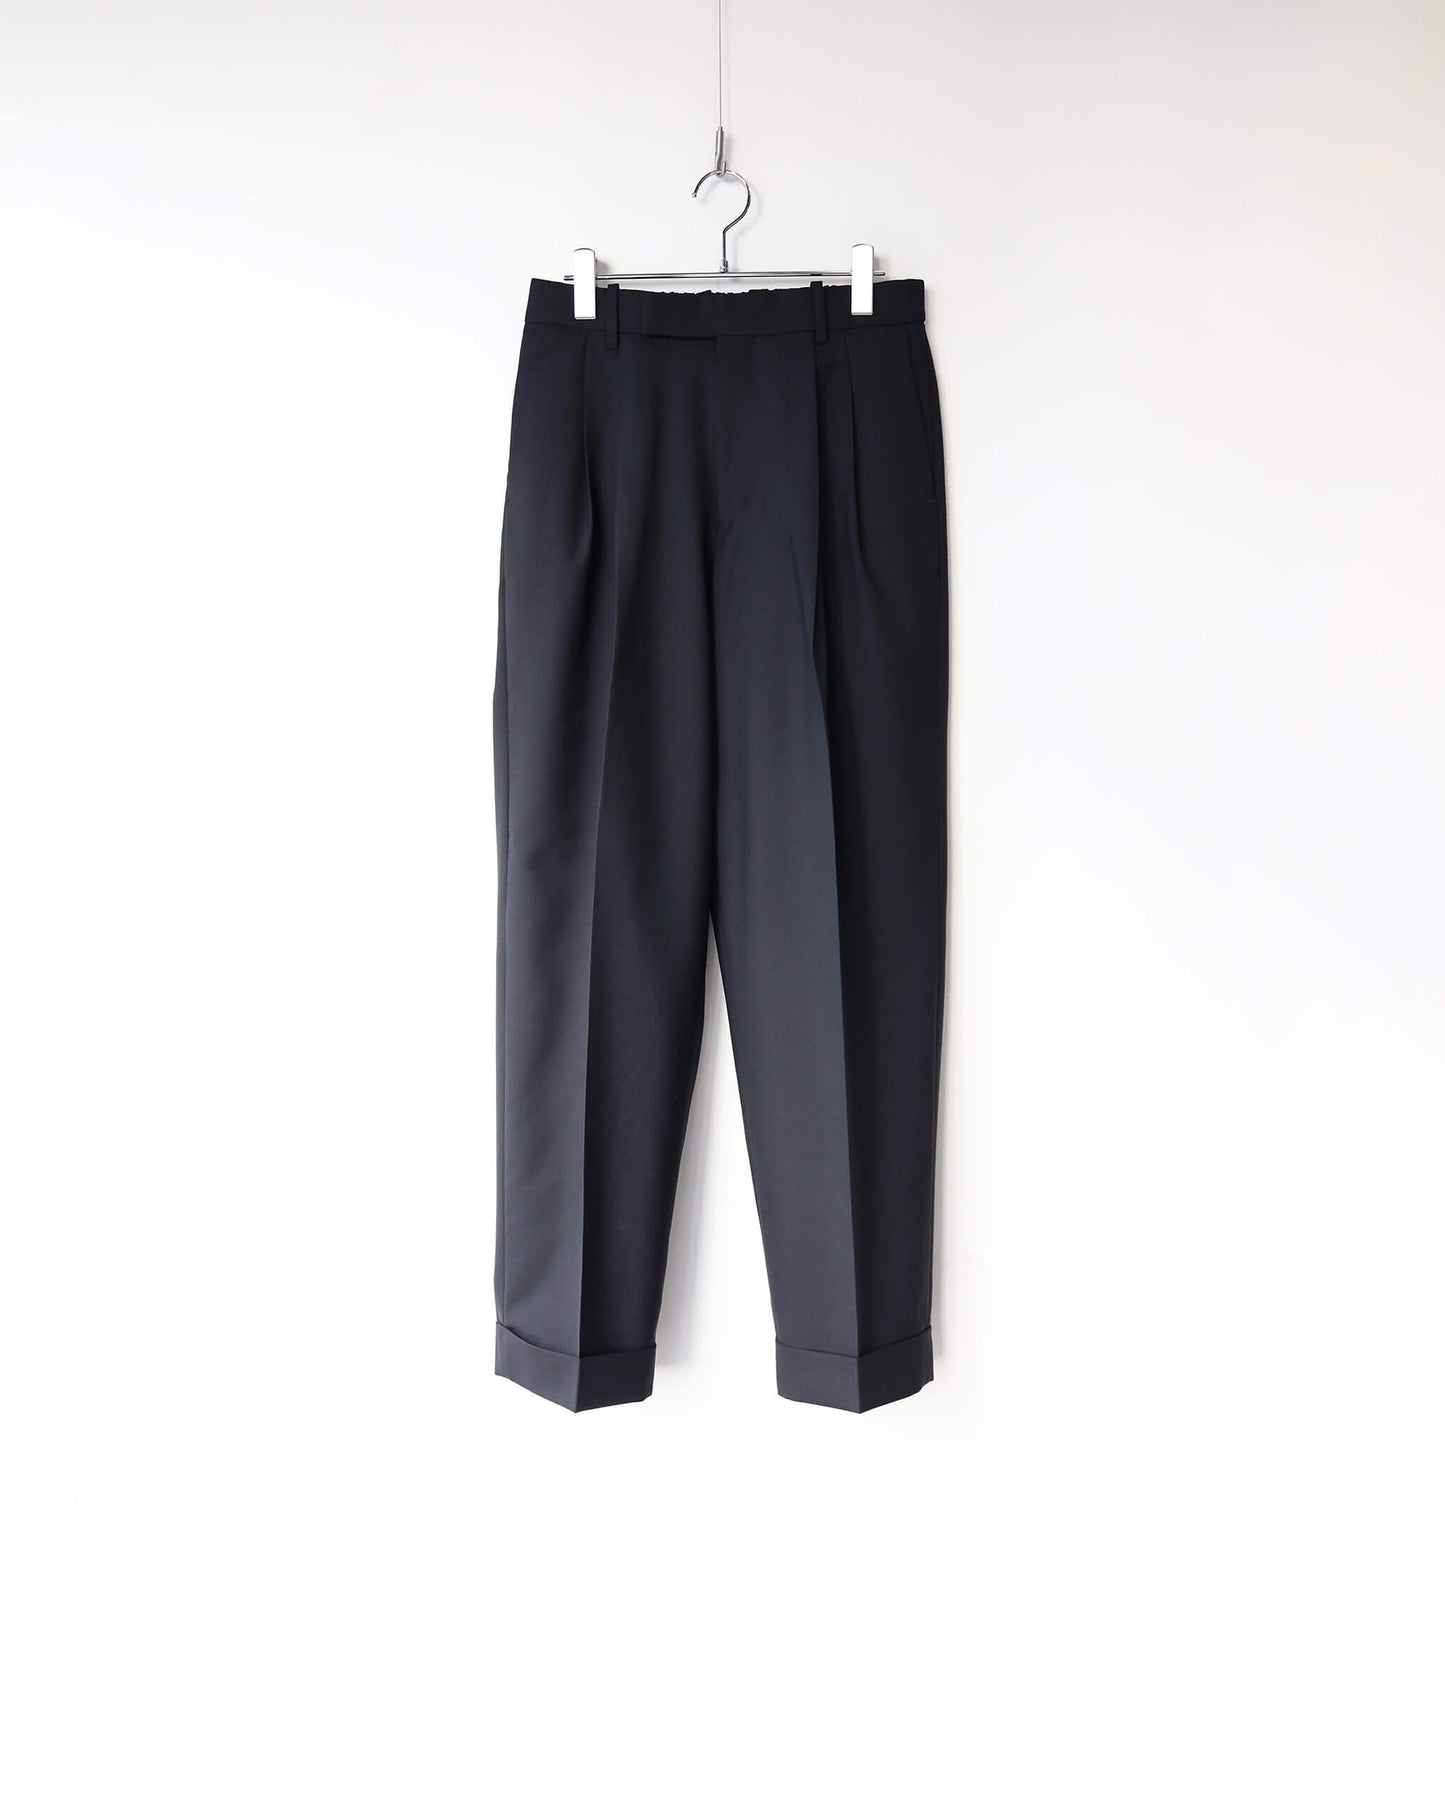 DOUBLE PLEATED CLASSIC WIDE TROUSERS ORGANIC WOOL TROPICAL "BLACK"